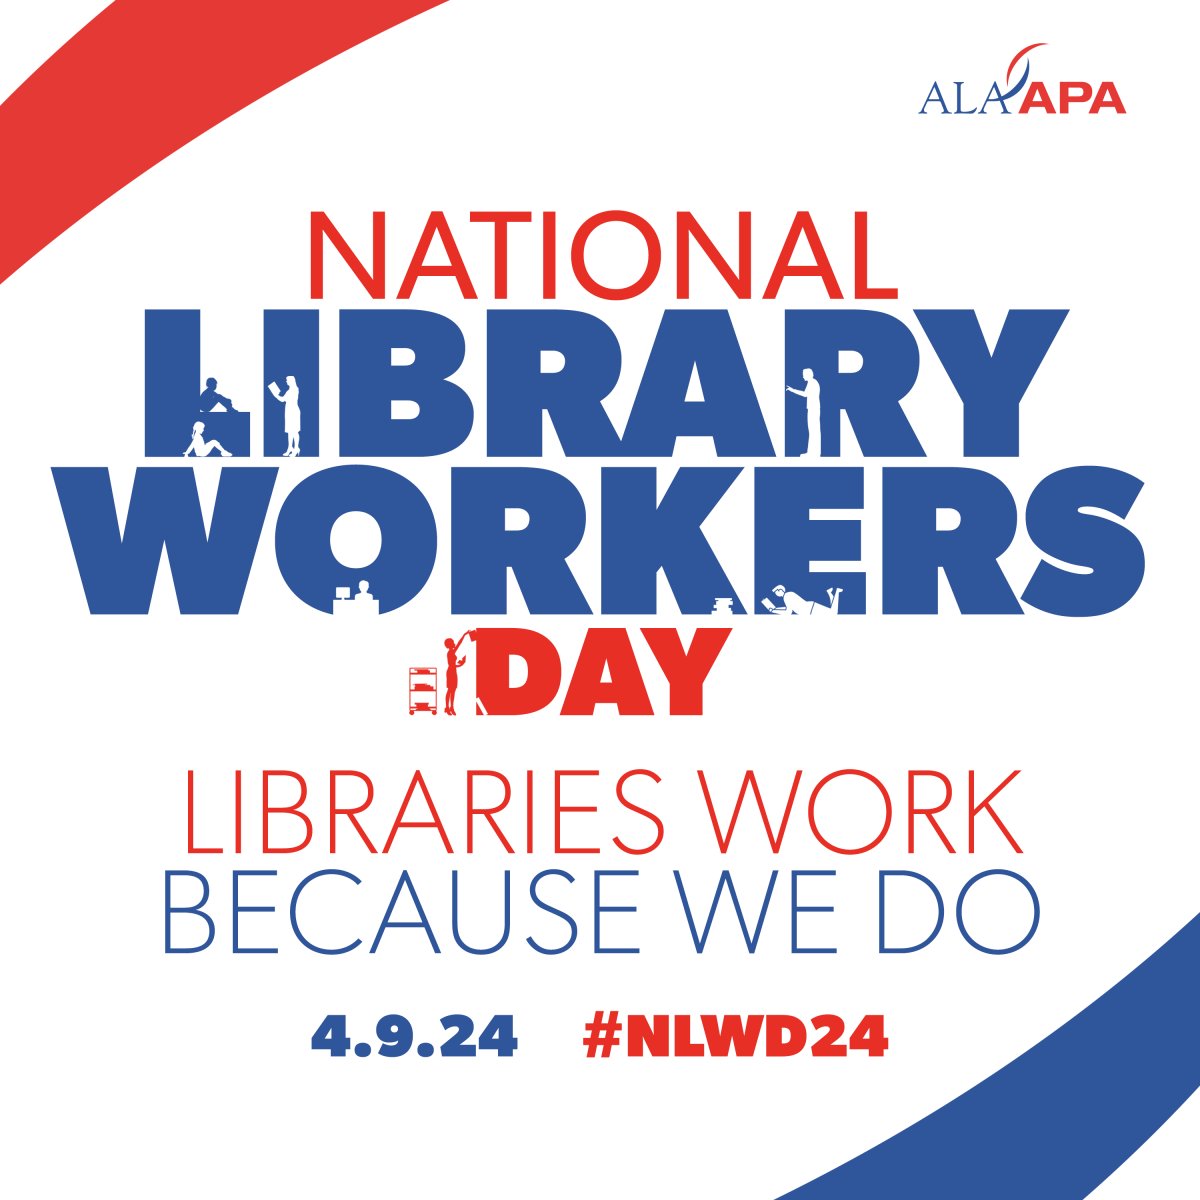 Today is National Library Workers Day! Give a shout-out to your CSUSM Library faculty and staff in the comments! #CSUSM #CSUSMLibrary #LibraryWorkers #NLWD24